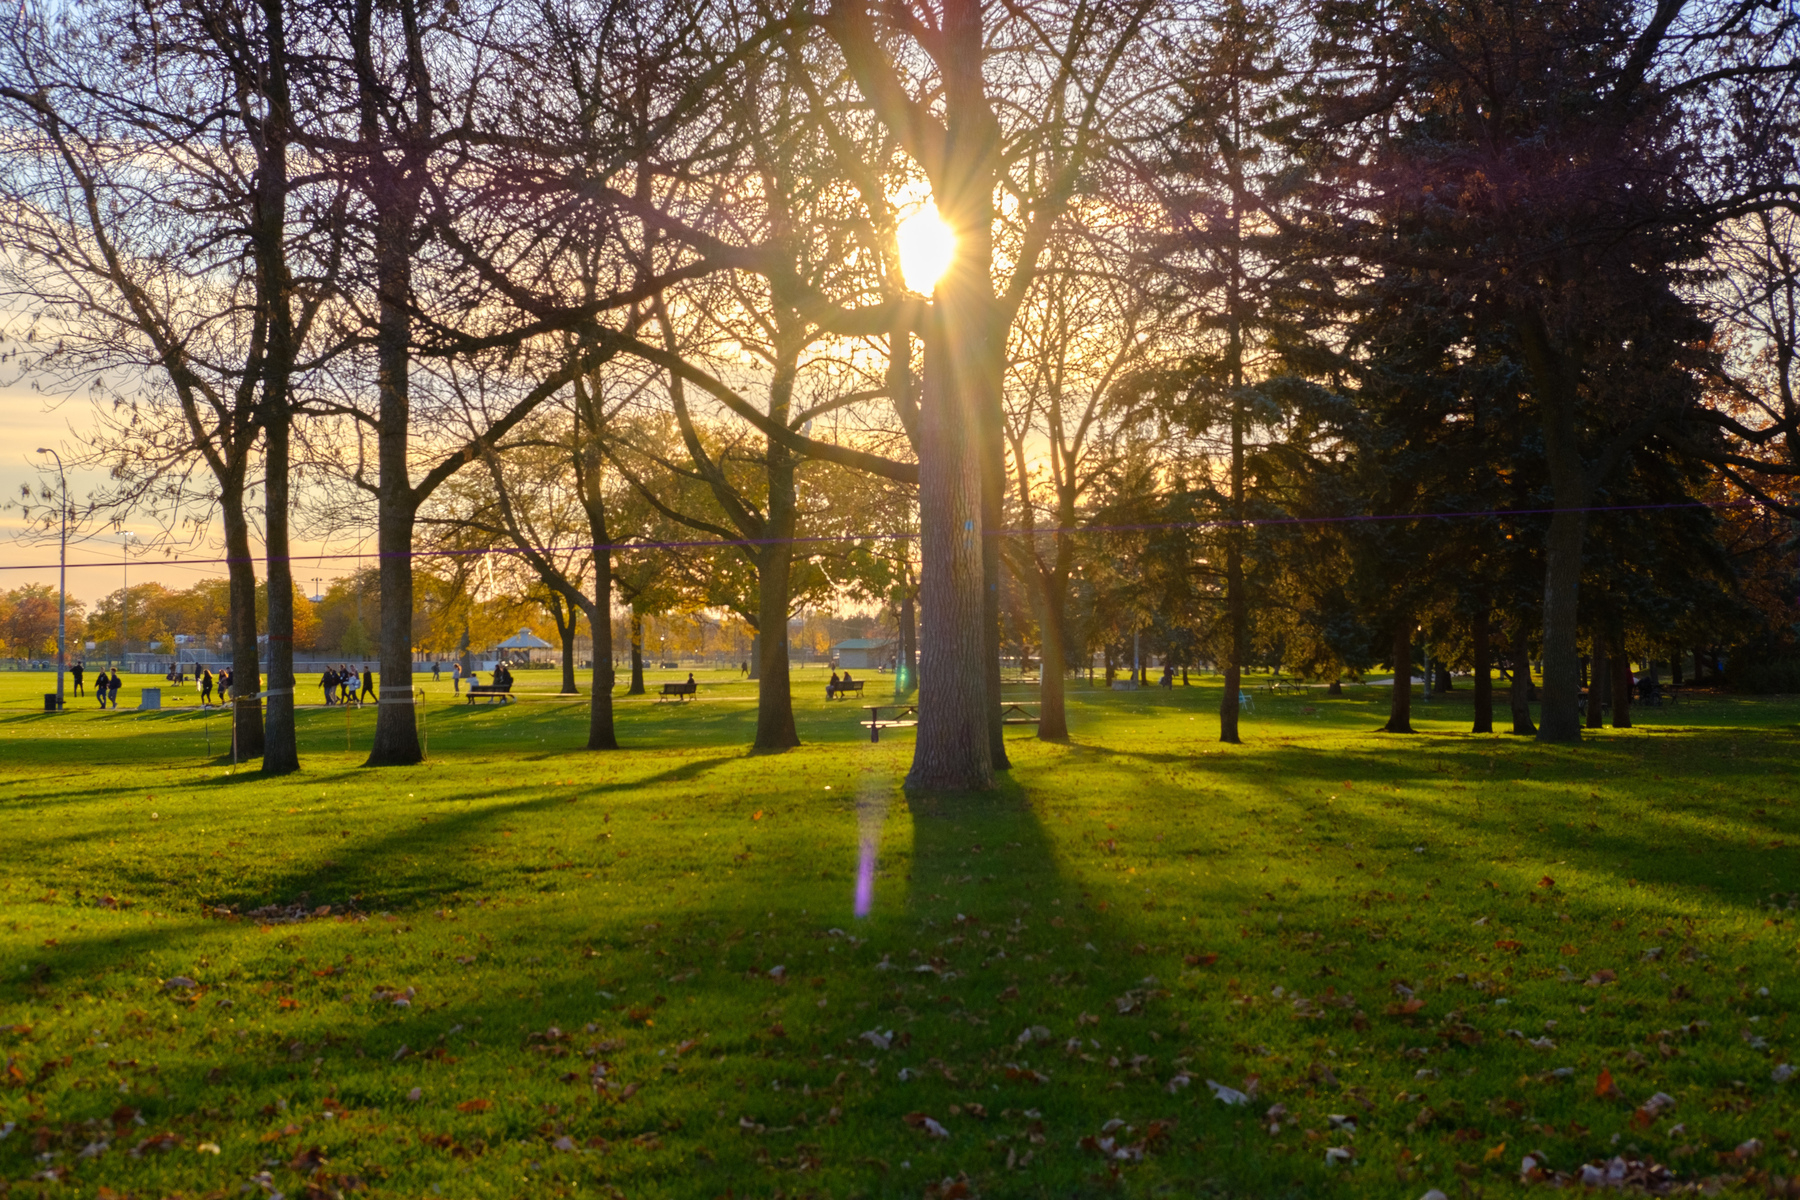 The sun sets on an autumnal Parc Jarry. The trees cast impossibly long shadows and we see people dot the park.